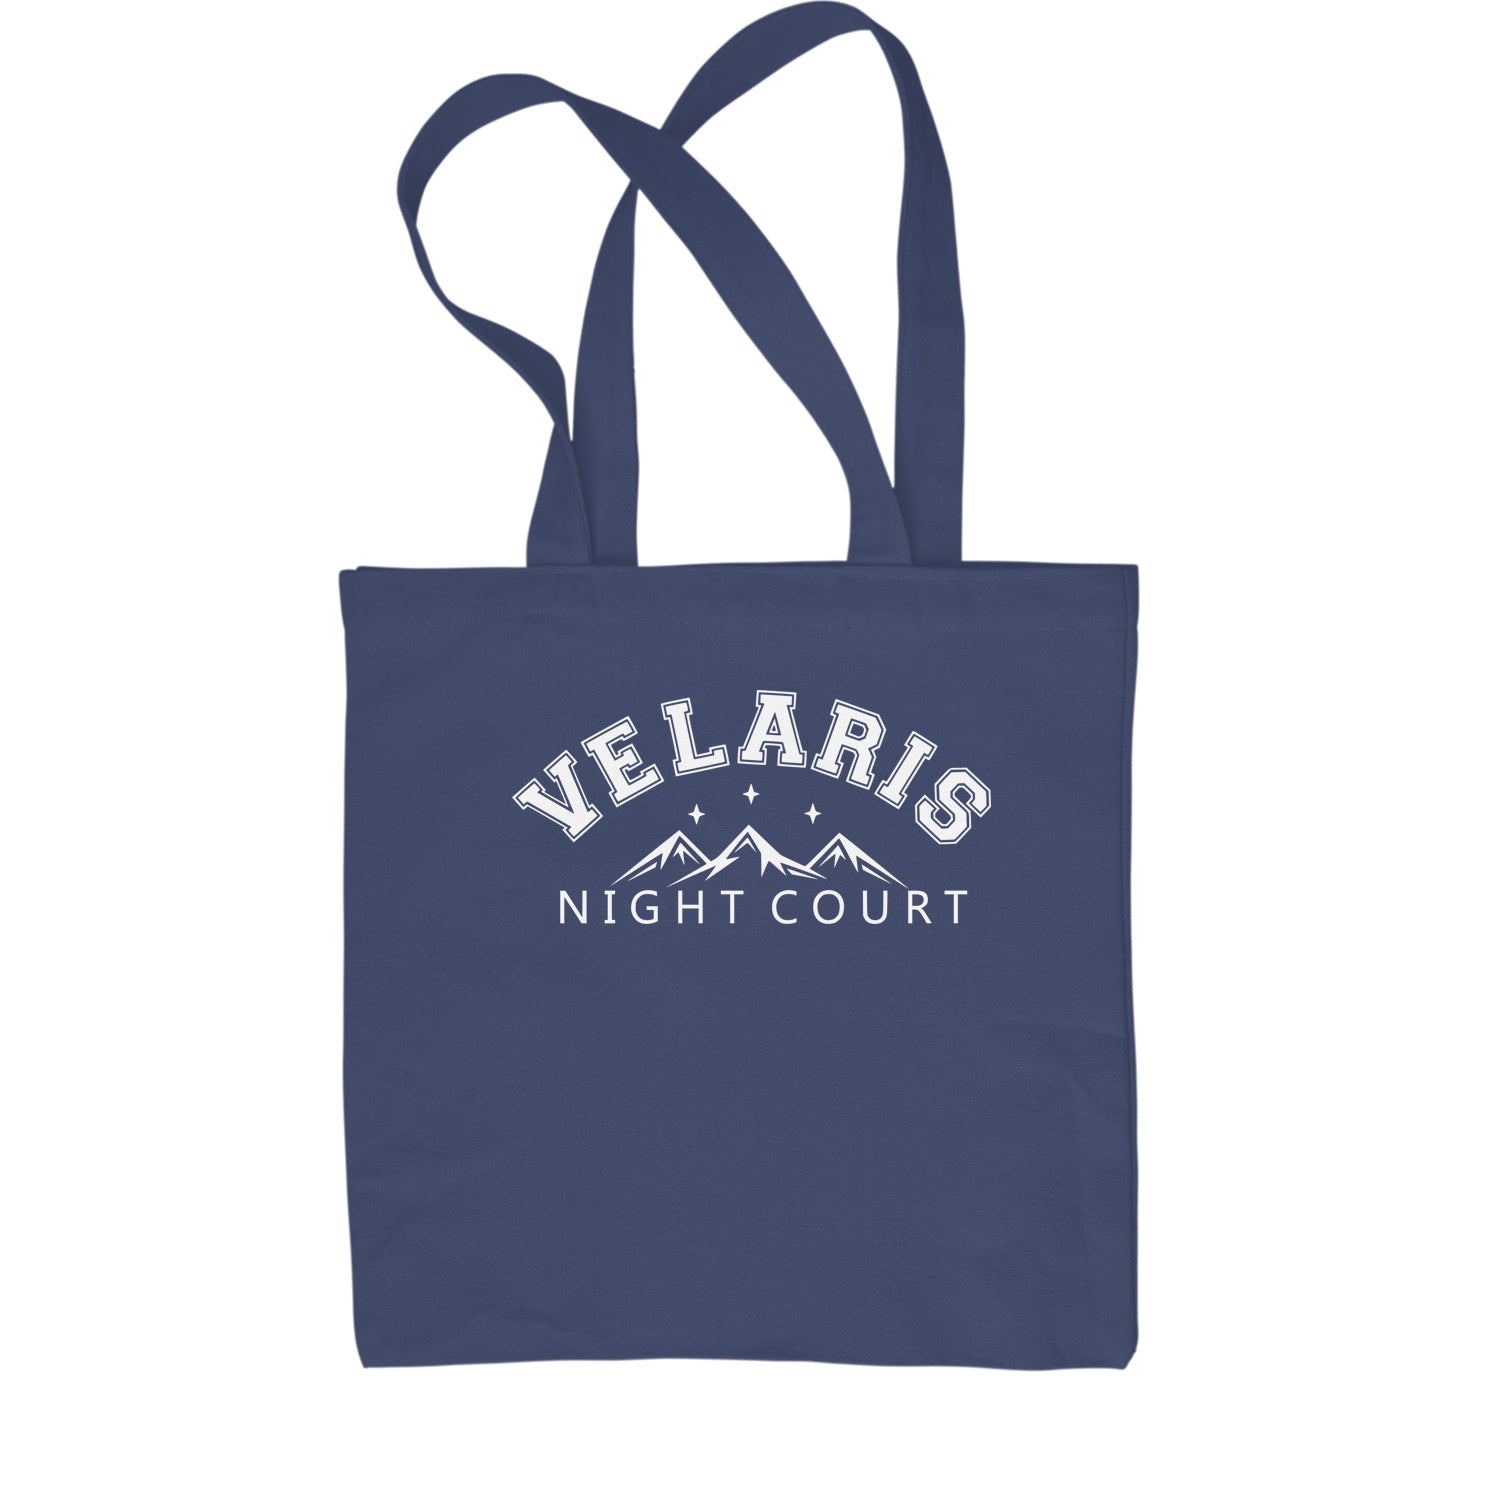 Velaris Night Court Squad Shopping Tote Bag acotar, court, illyrian, maas, of, thorns by Expression Tees